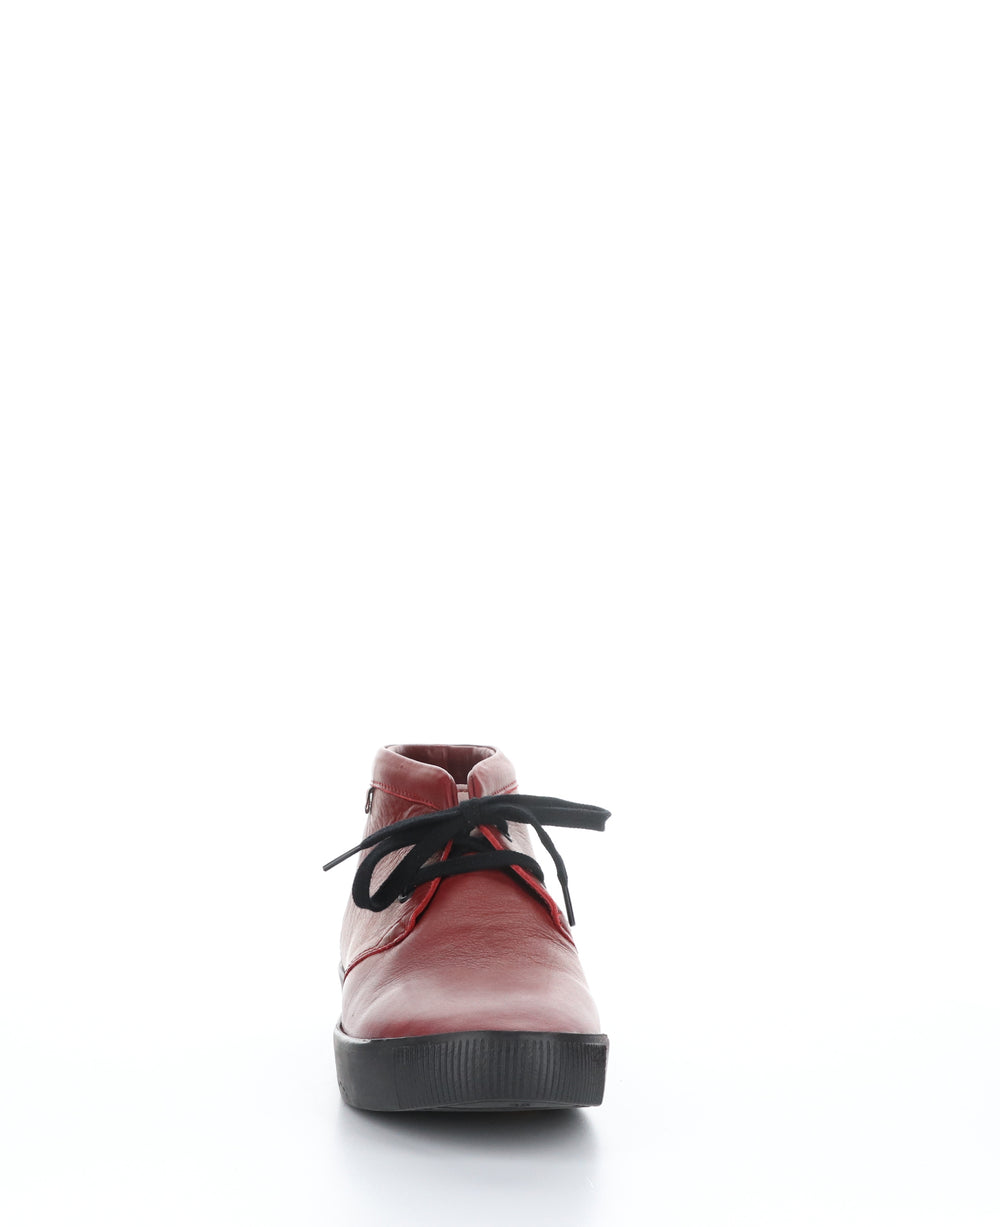 SIAL607SOF Red Round Toe Shoes|SIAL607SOF Chaussures à Bout Rond in Rouge